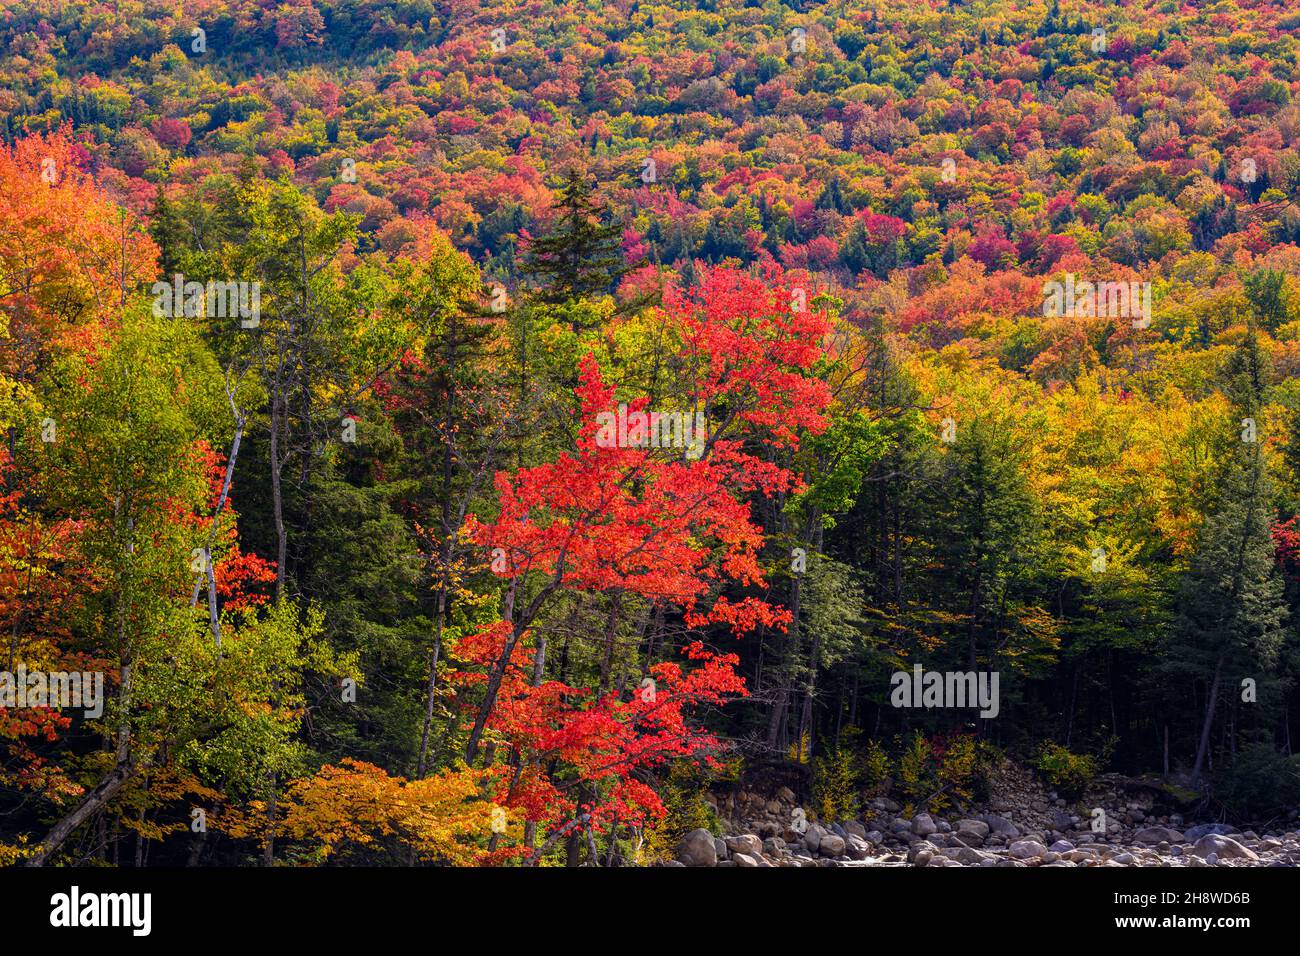 Autumn foliage in the deciduous forest on New England hillsides, , New Hampshire, USA Stock Photo